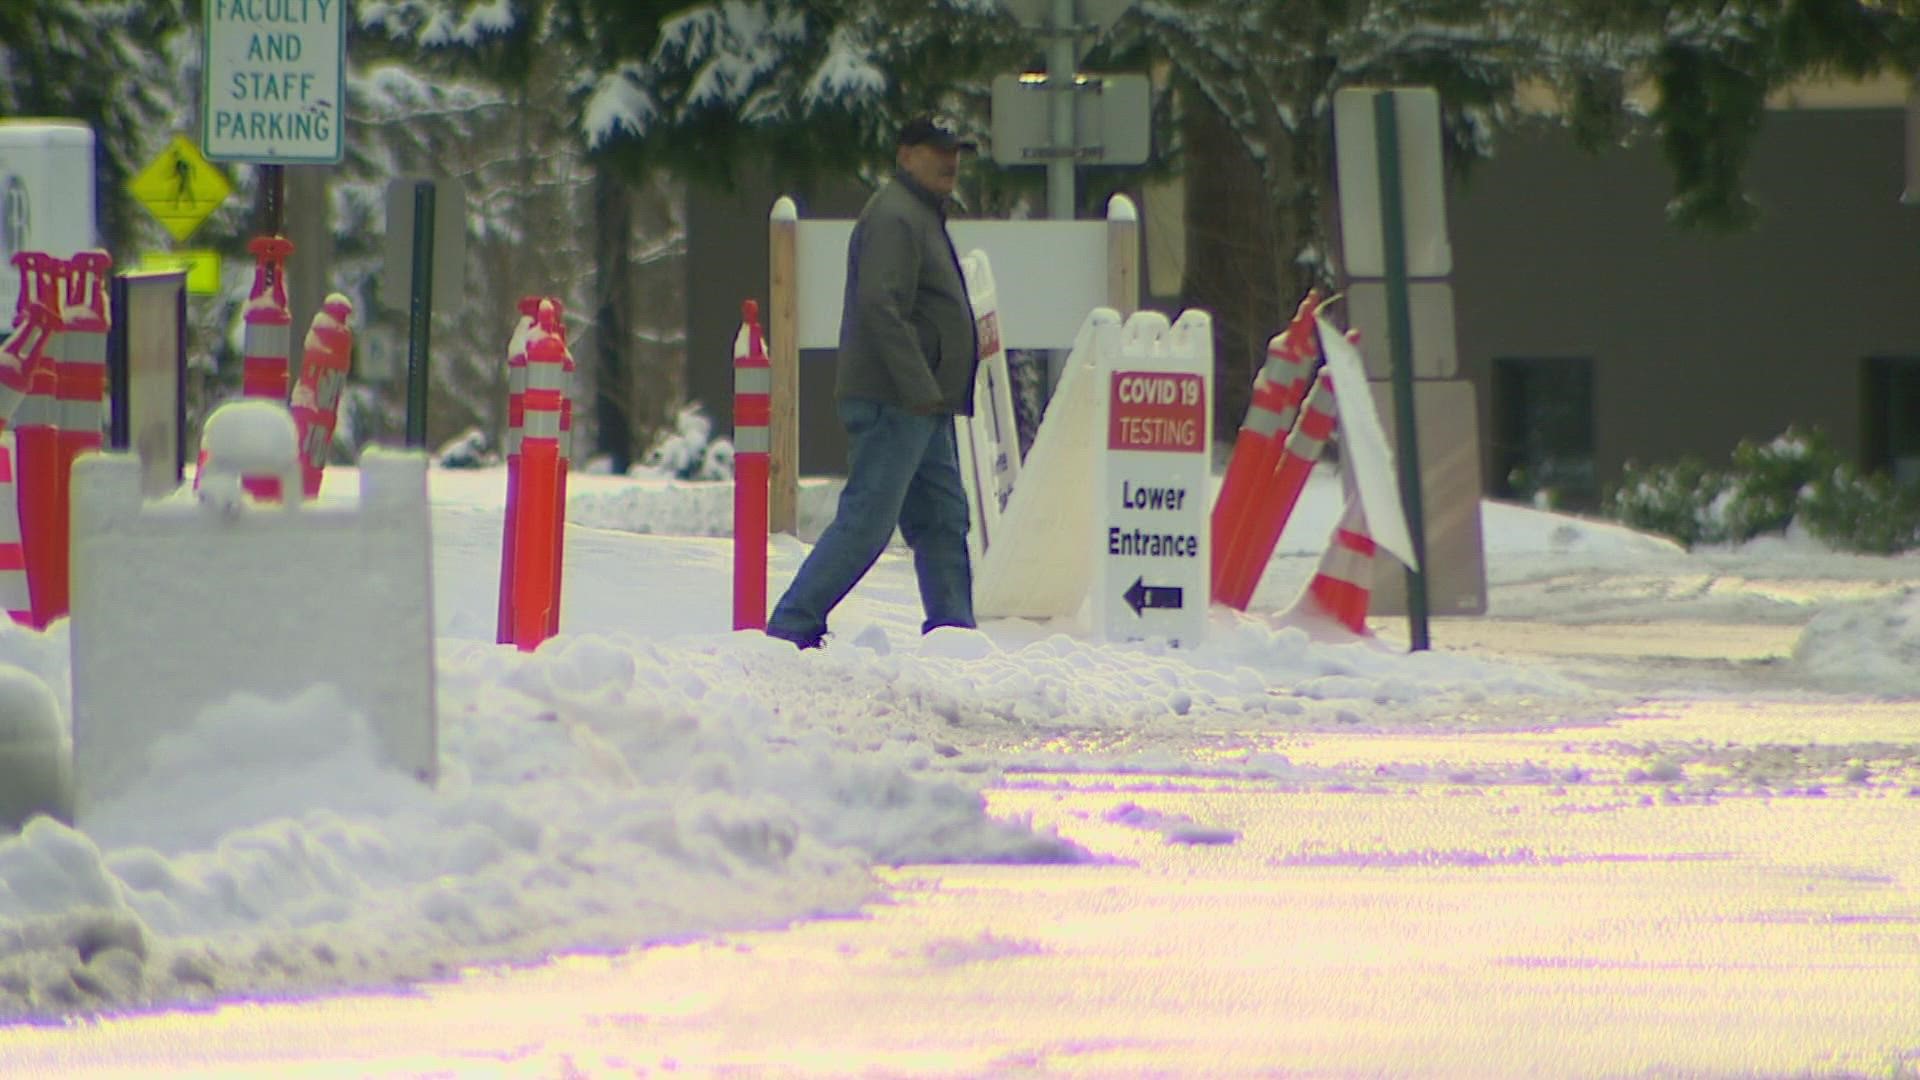 Winter weather closed at least 20 COVID-19 testing and vaccine sites across western Washington Tuesday.